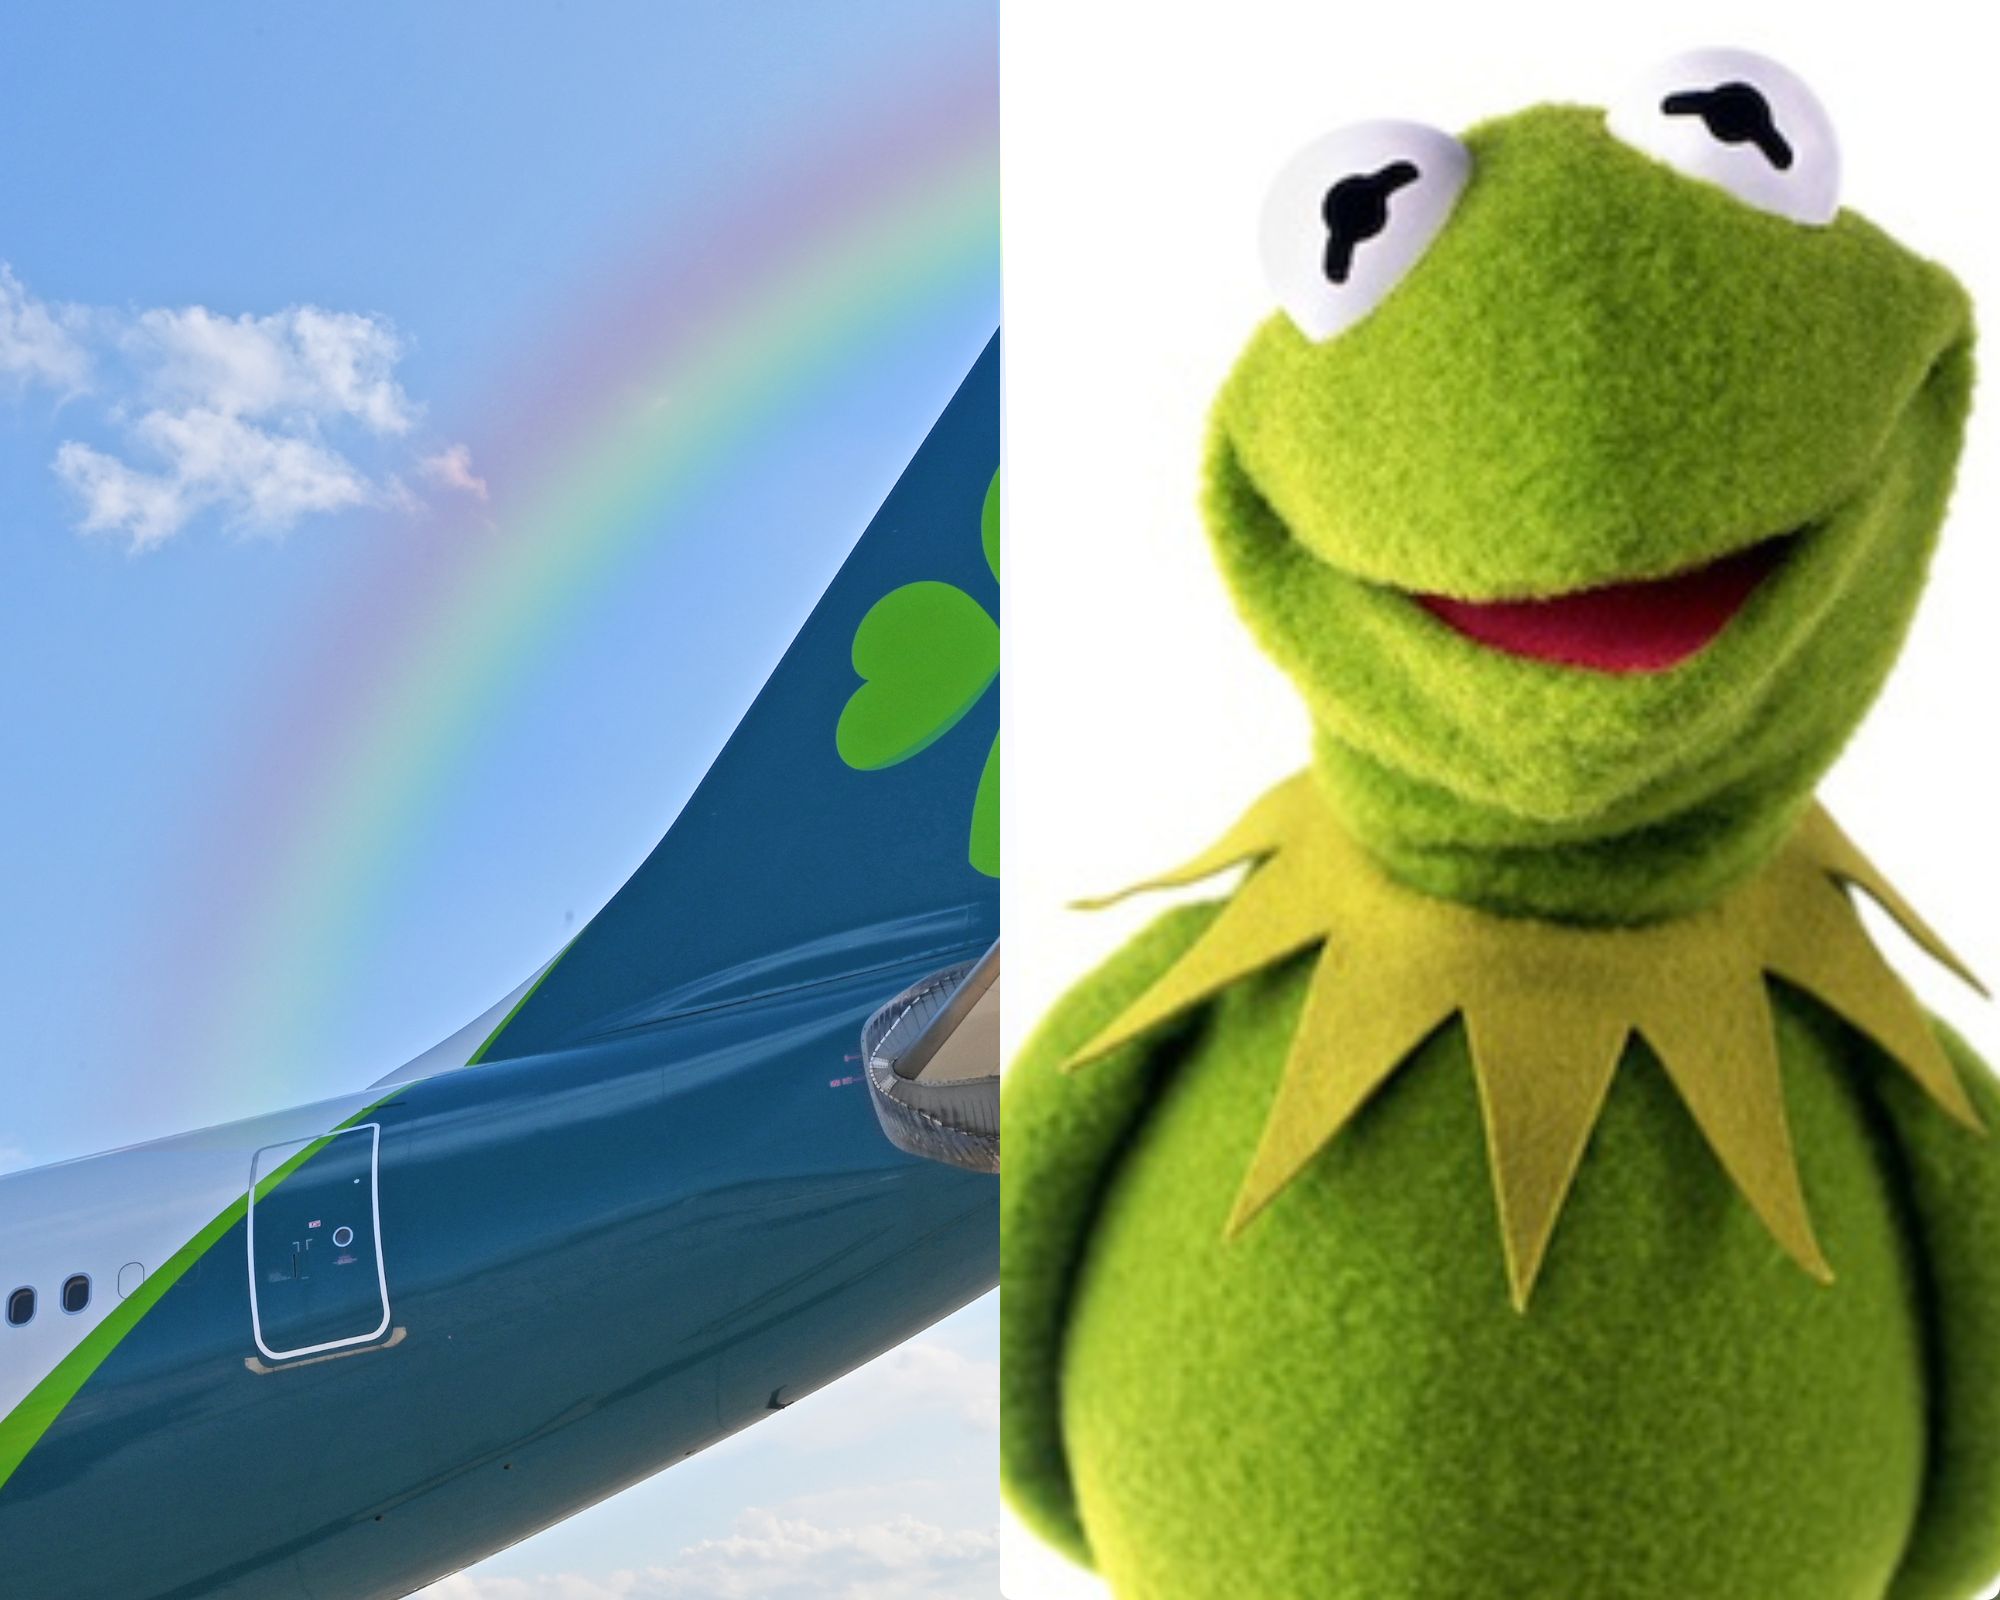 muppets as airlines mco airport